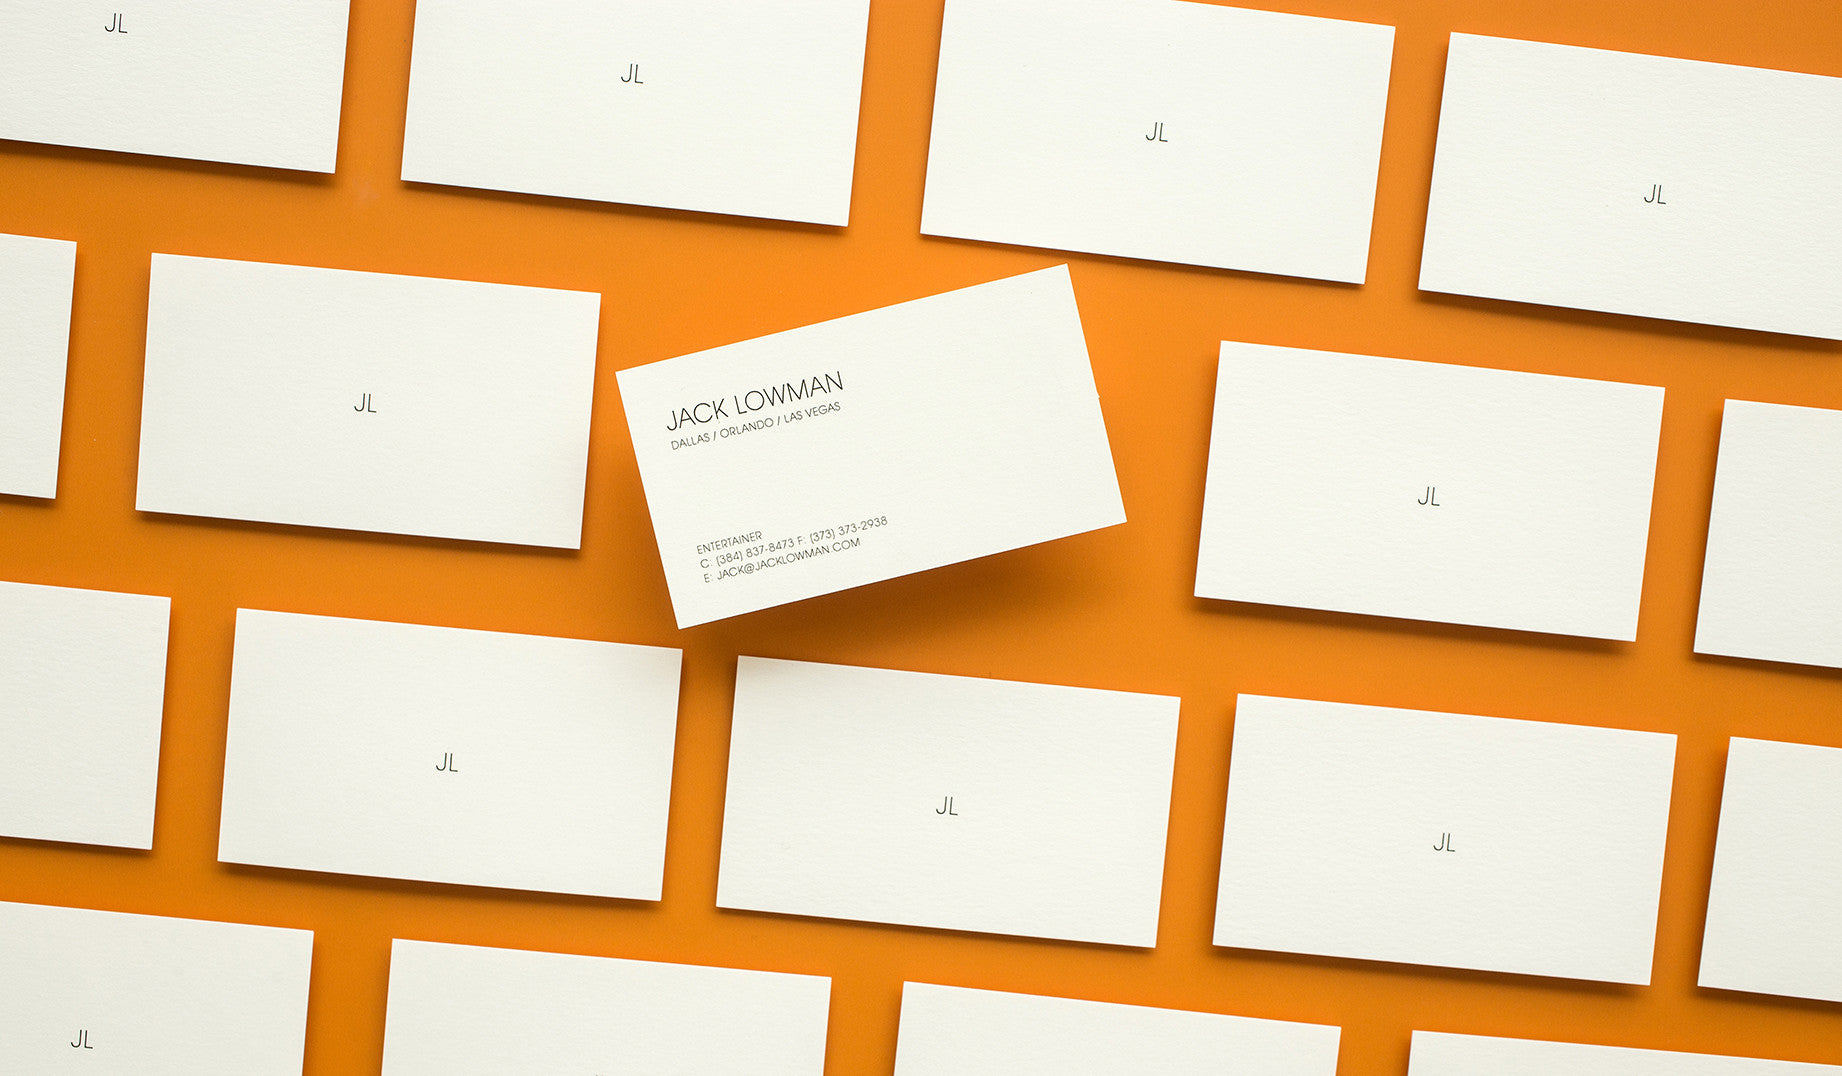 Choose from four formats for your business cards, the Traditional 2 x 3.5 inch size, our signature Tall Card at 3.3125 x 2.25 inches, the Square Card at 2.5 x 2.5 inches, or the original business card format that dates back to the 1800's -- the Calling Card, which measures in at 3 x 3.75 inches.